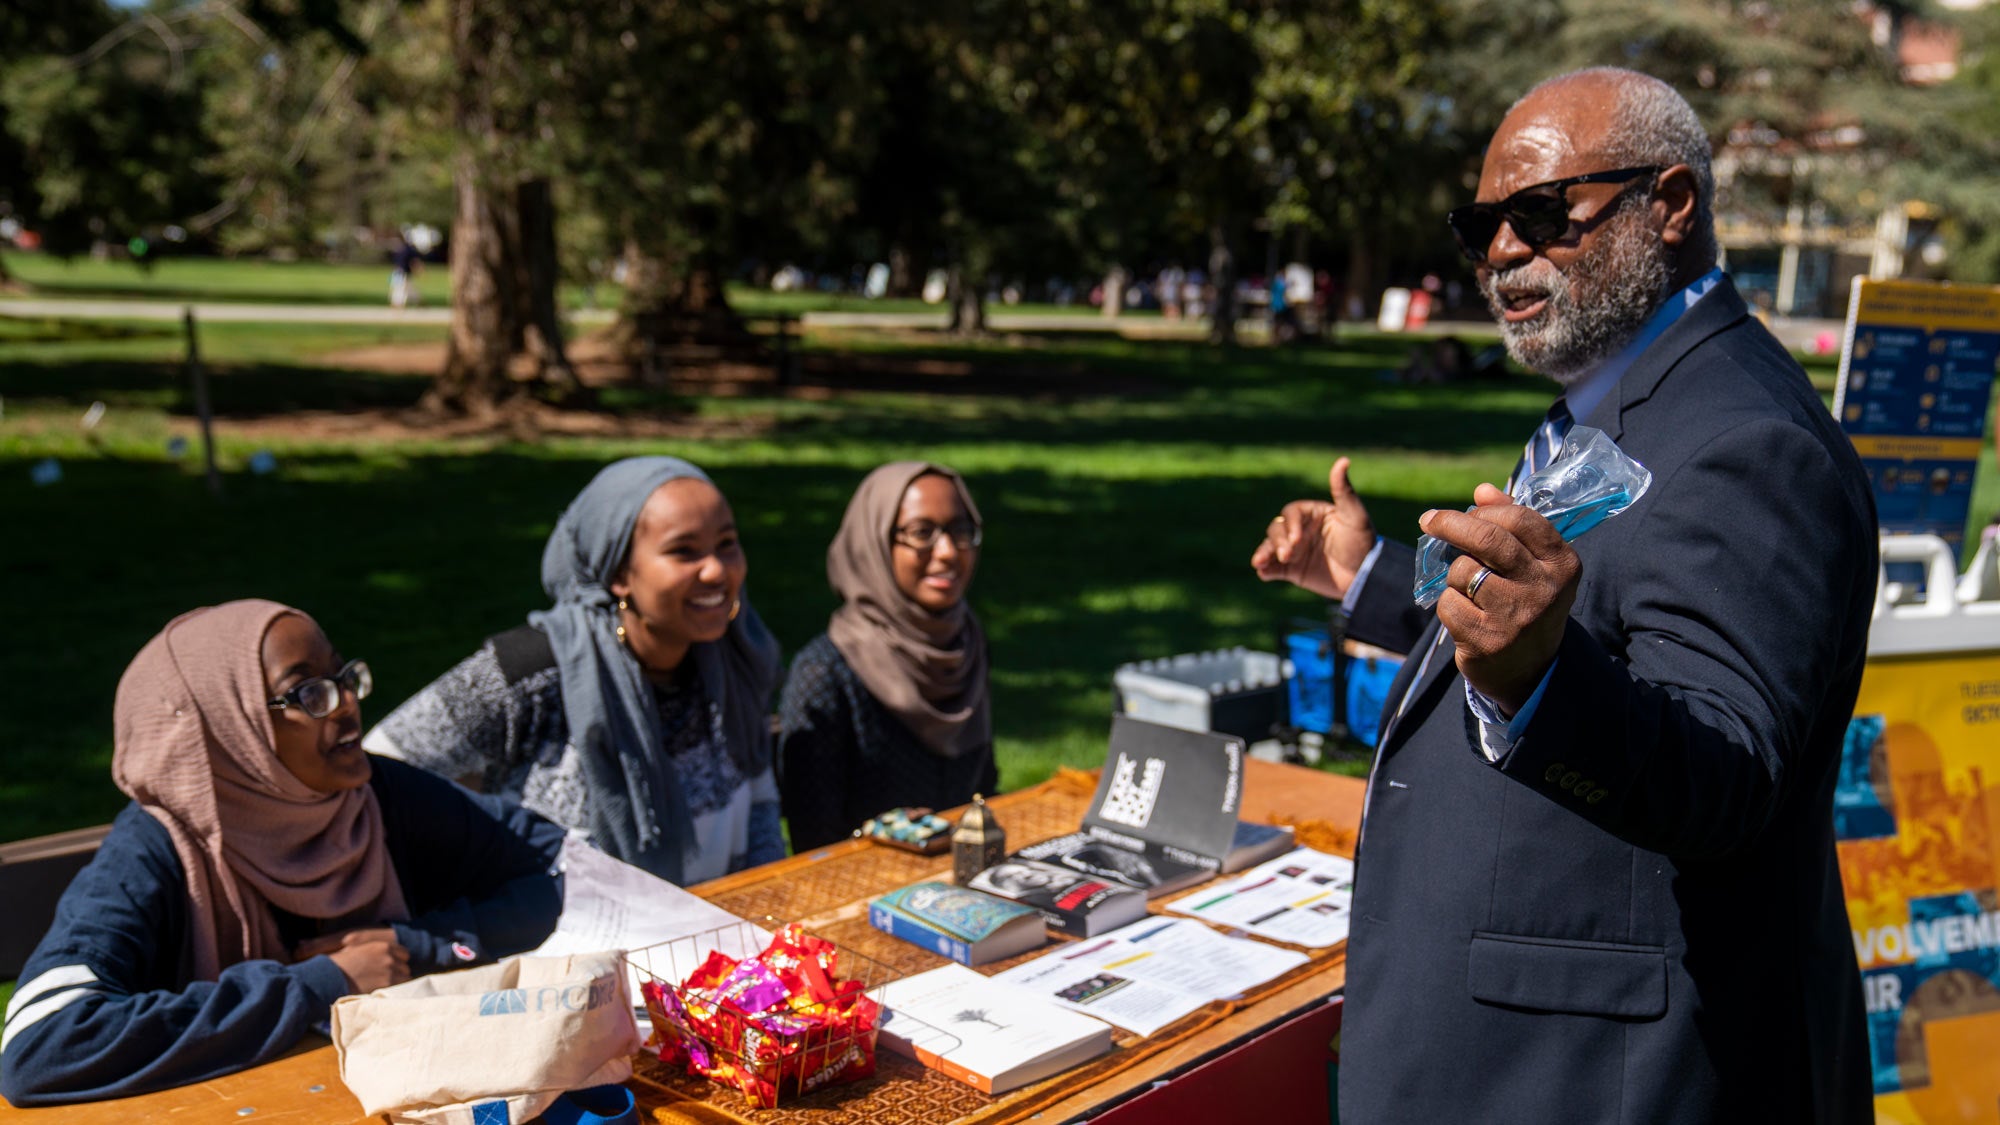 Rahim reed visits students who are tabling on the Quad.